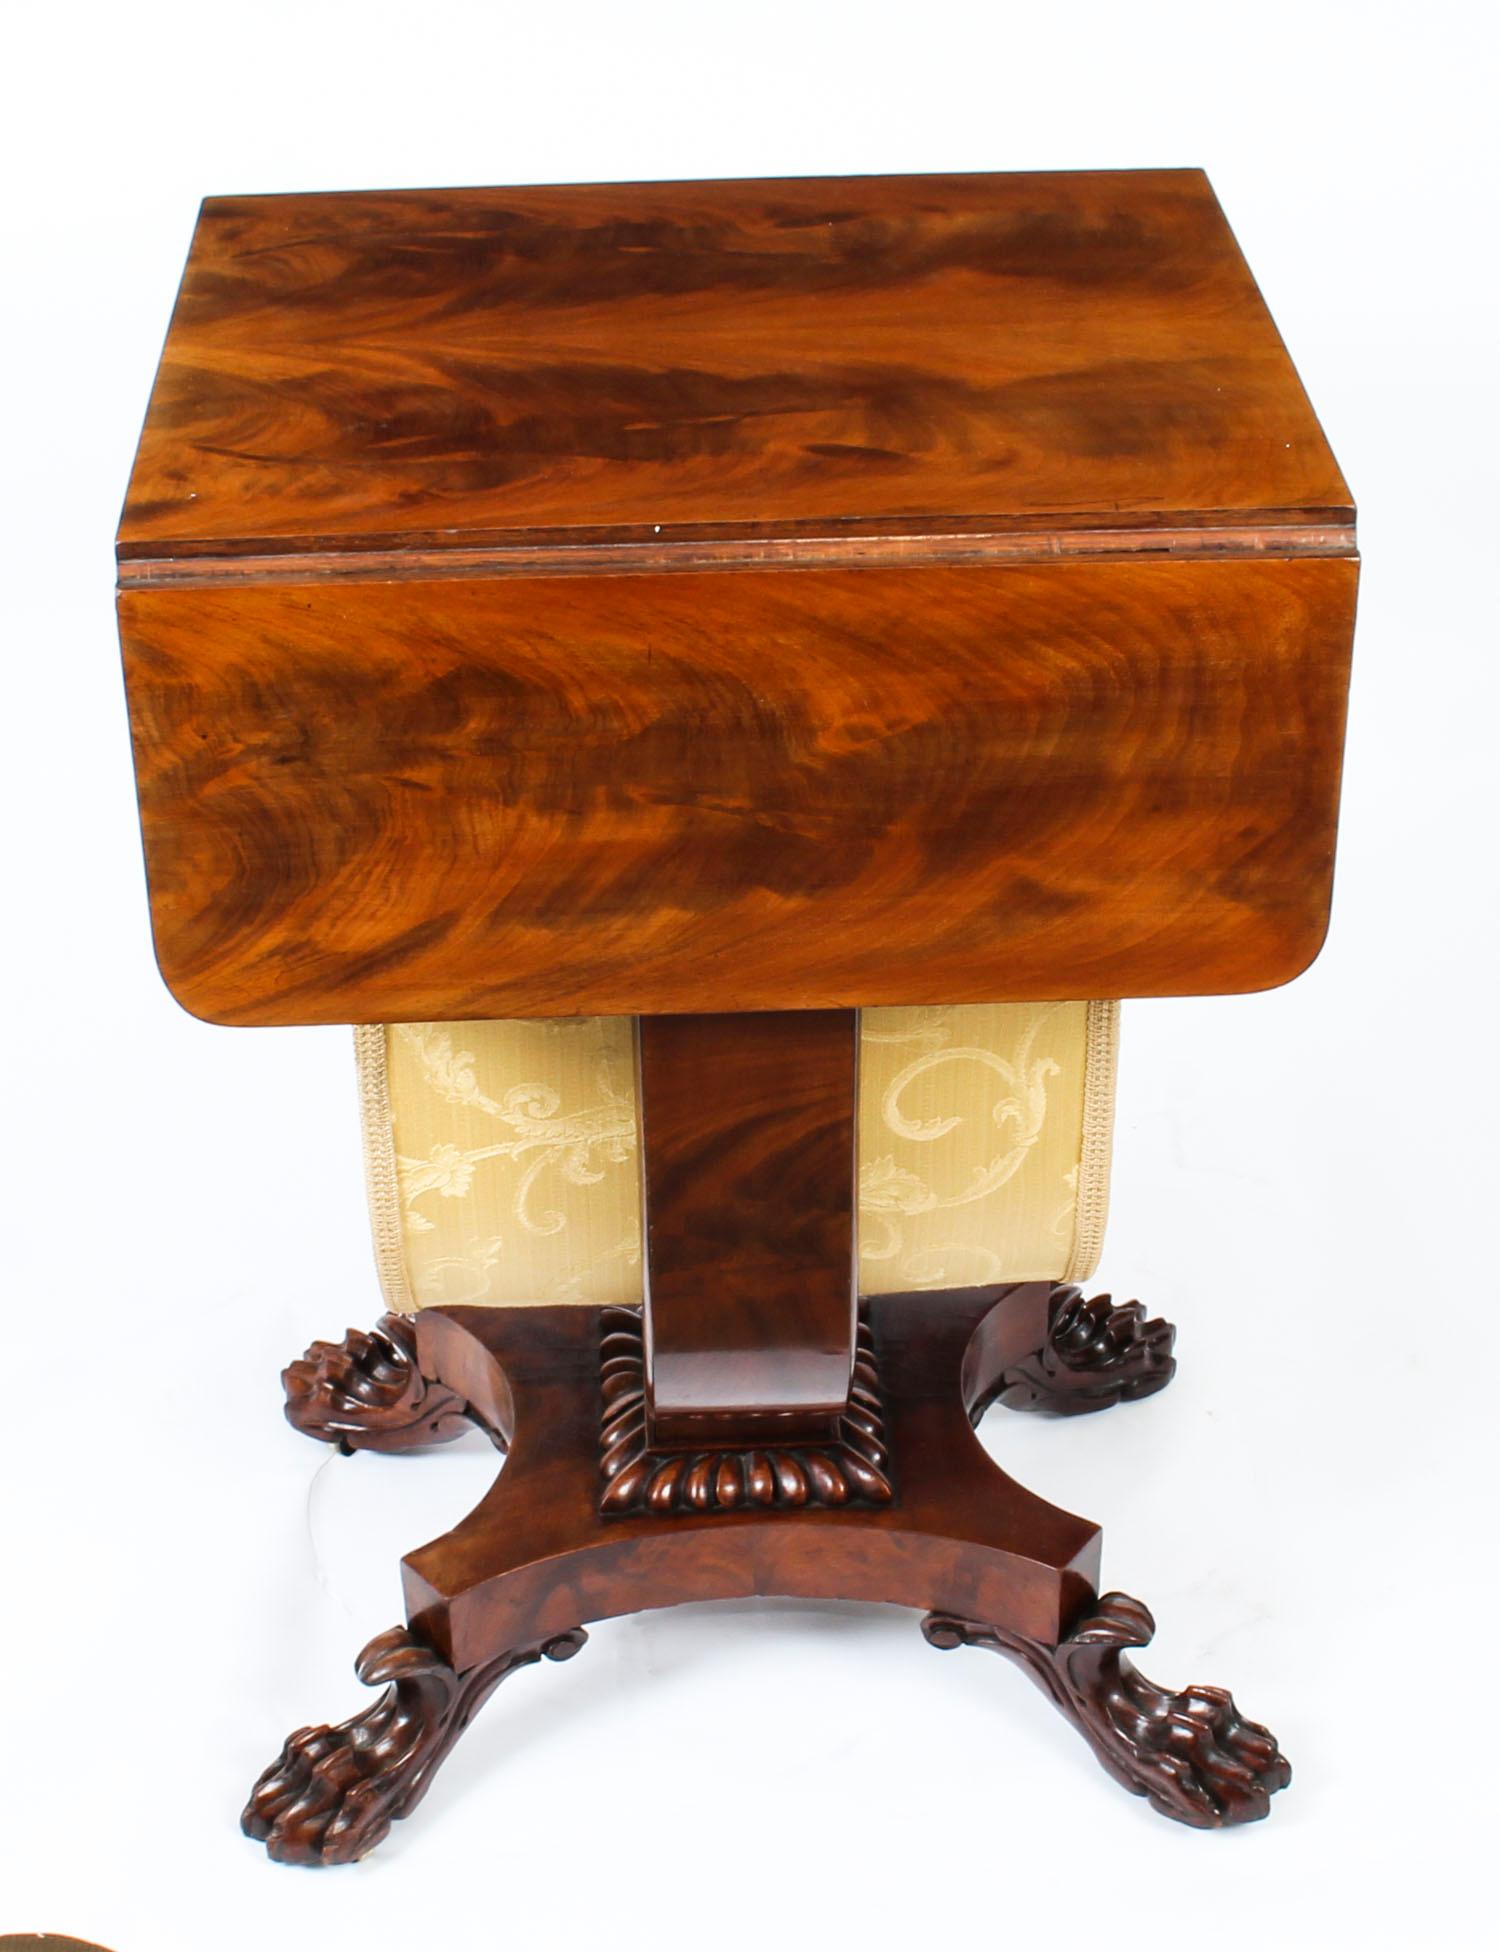 Antique William IV Drop-Leaf Work Occasional Table Flame Mahogany, 19th Century For Sale 1